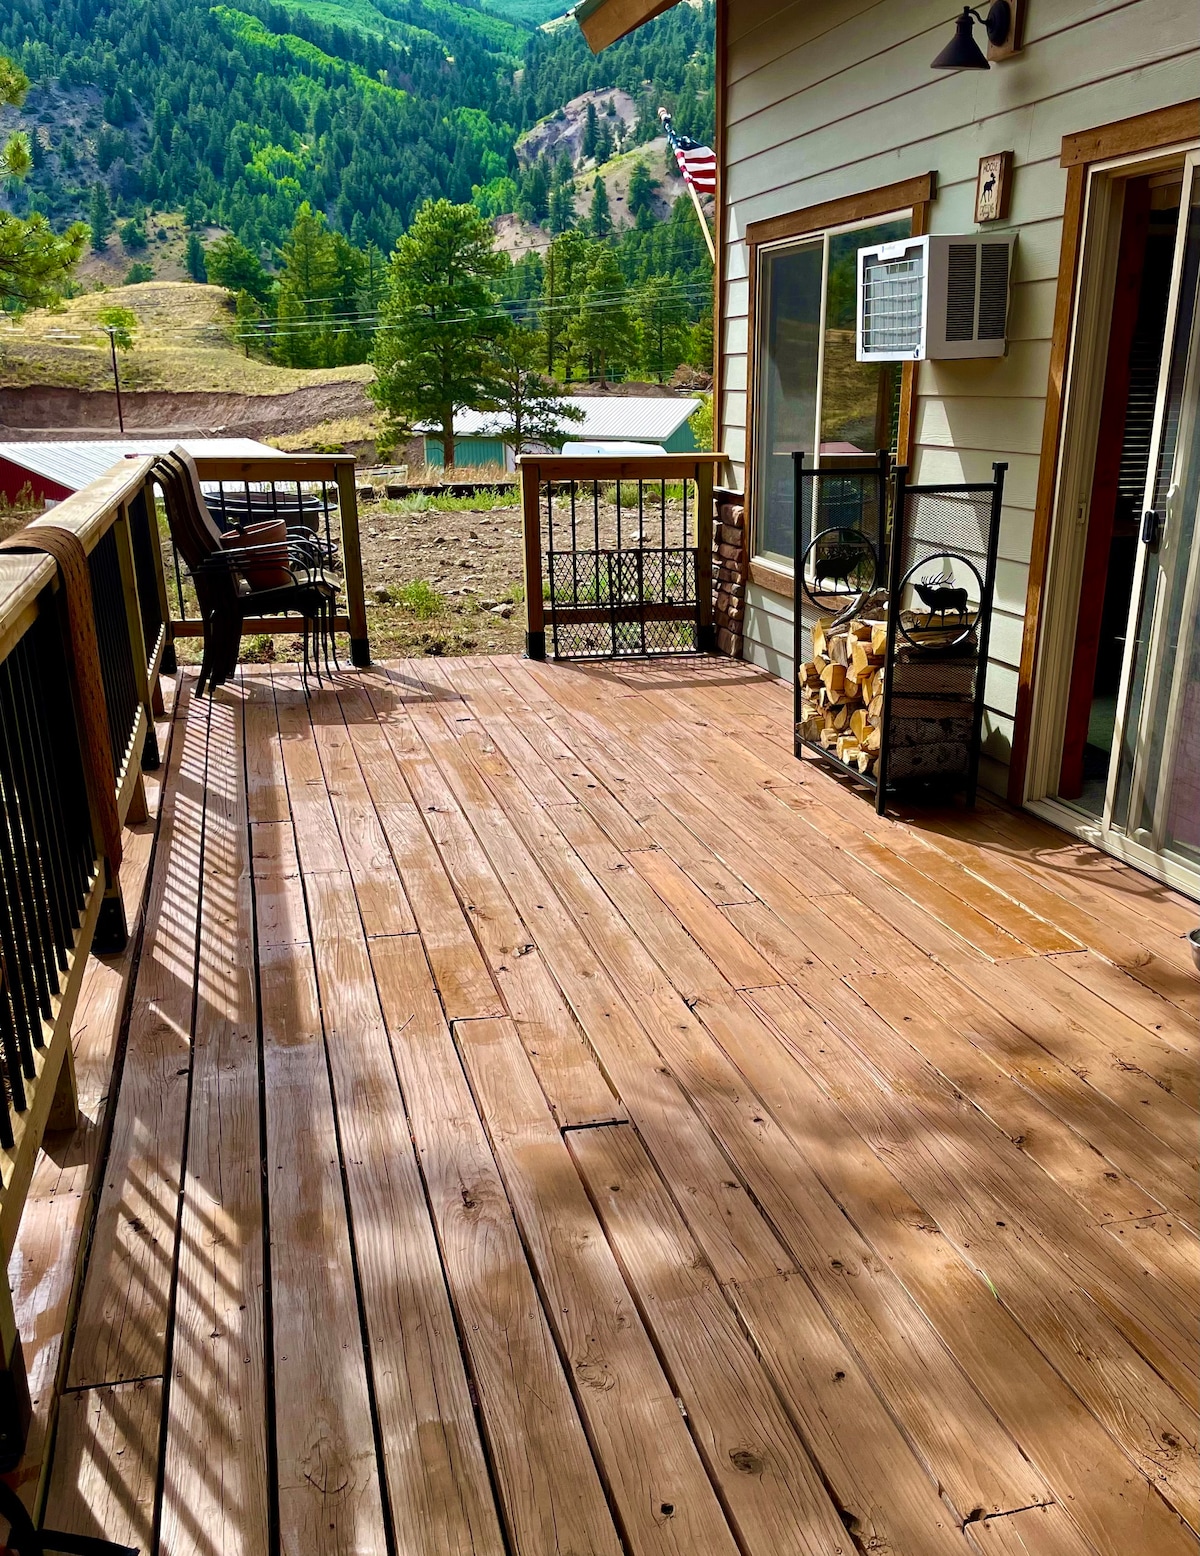 28 Peaks - Relax and unwind with mountain views!